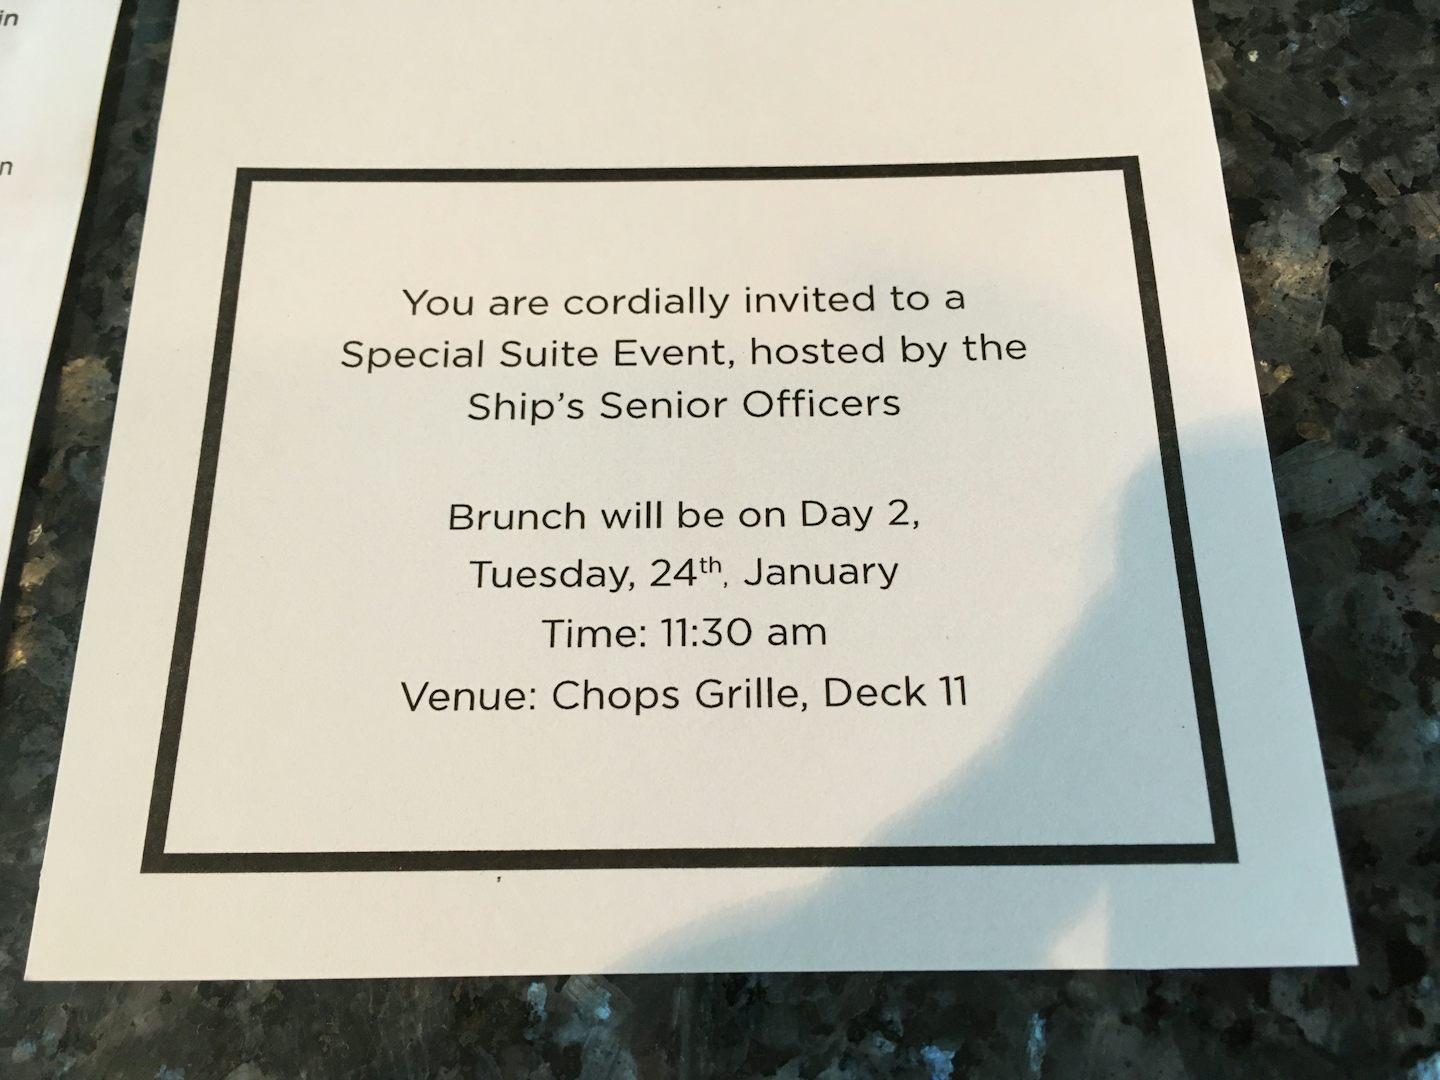 Invitation to exclusive event for Suite Guests